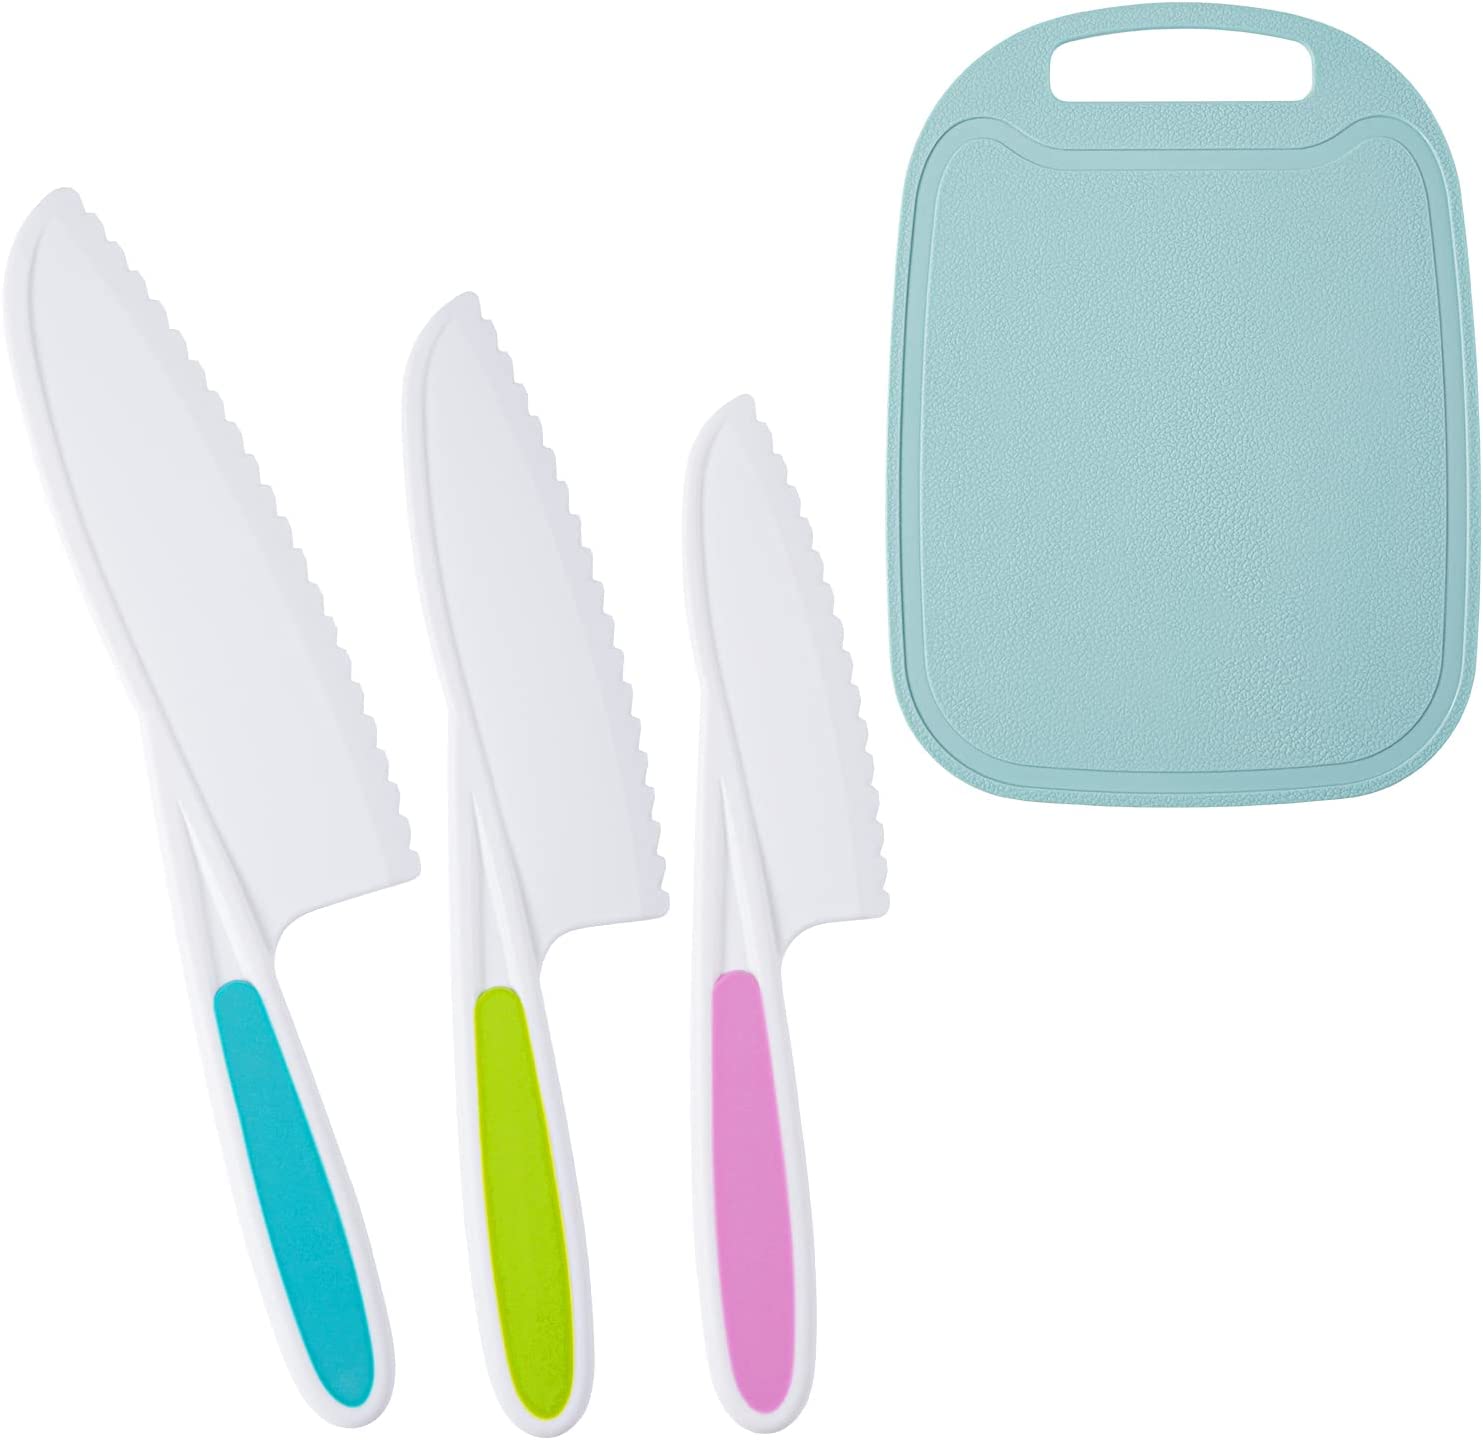 TOVLA JR. Kids Kitchen Montessori Knives and Foldable Cutting Board Set:  Children's Safety Cooking Knives in 3 Sizes & Colors/Firm Grip, Serrated